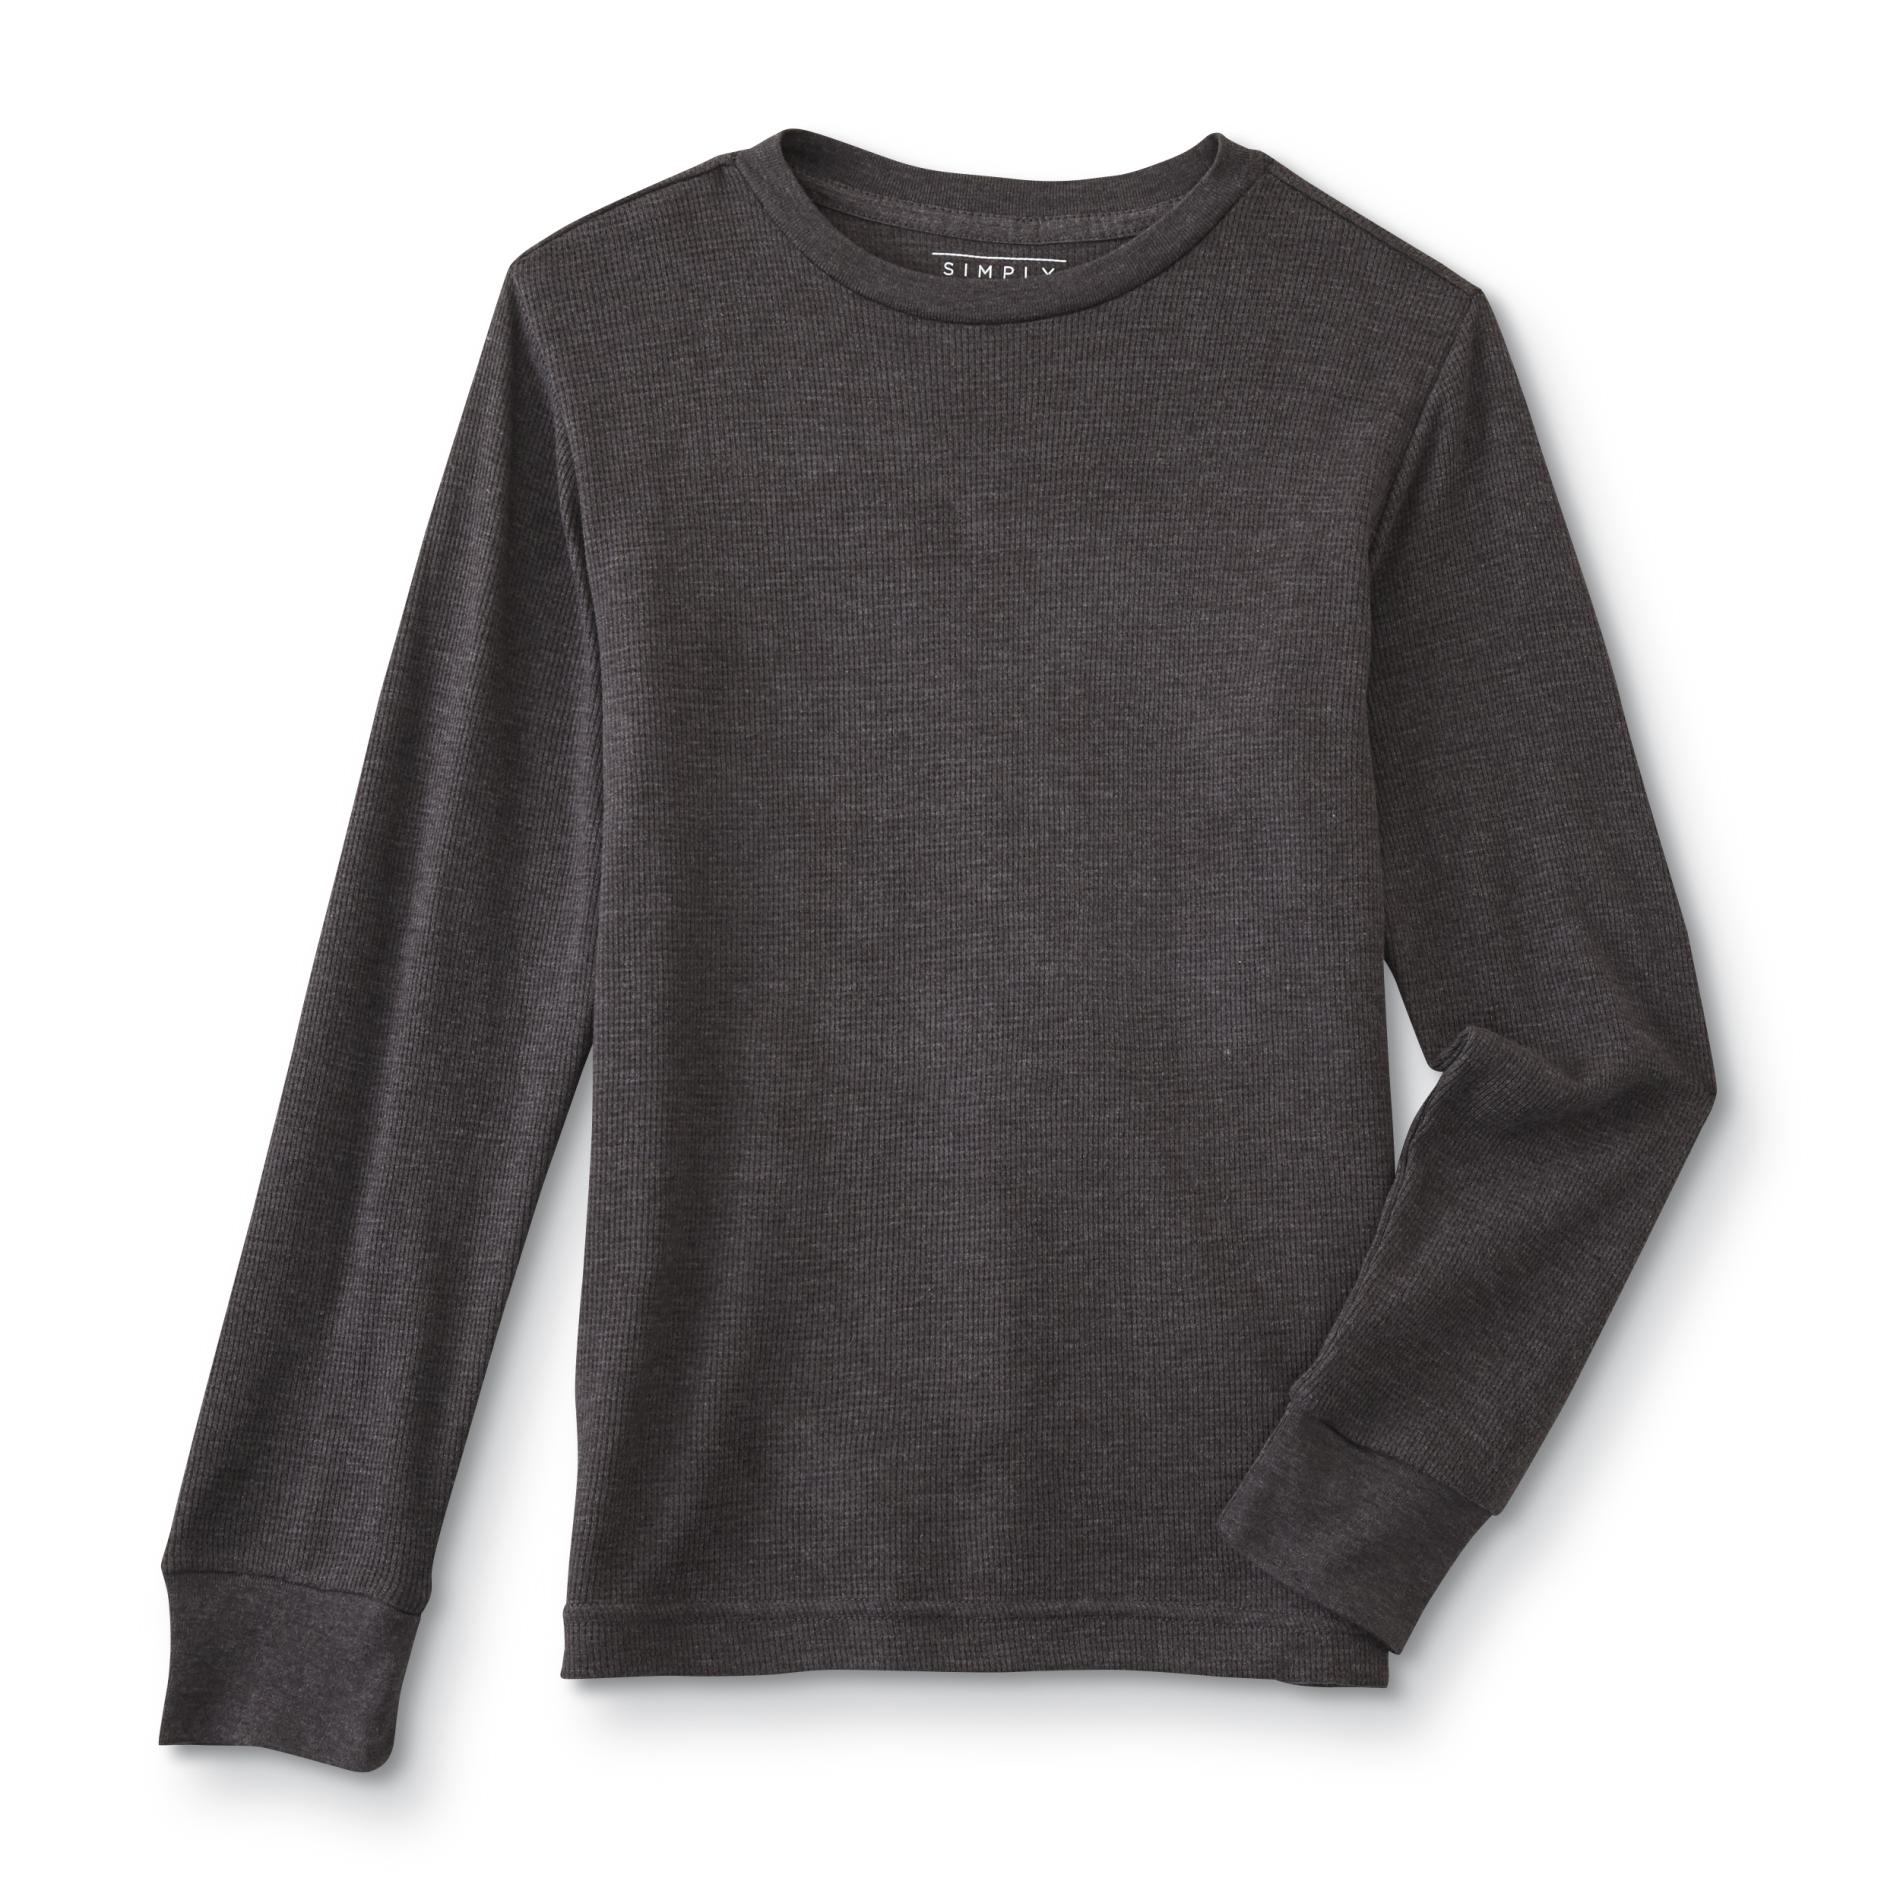 Simply Styled Boys' Thermal Shirt